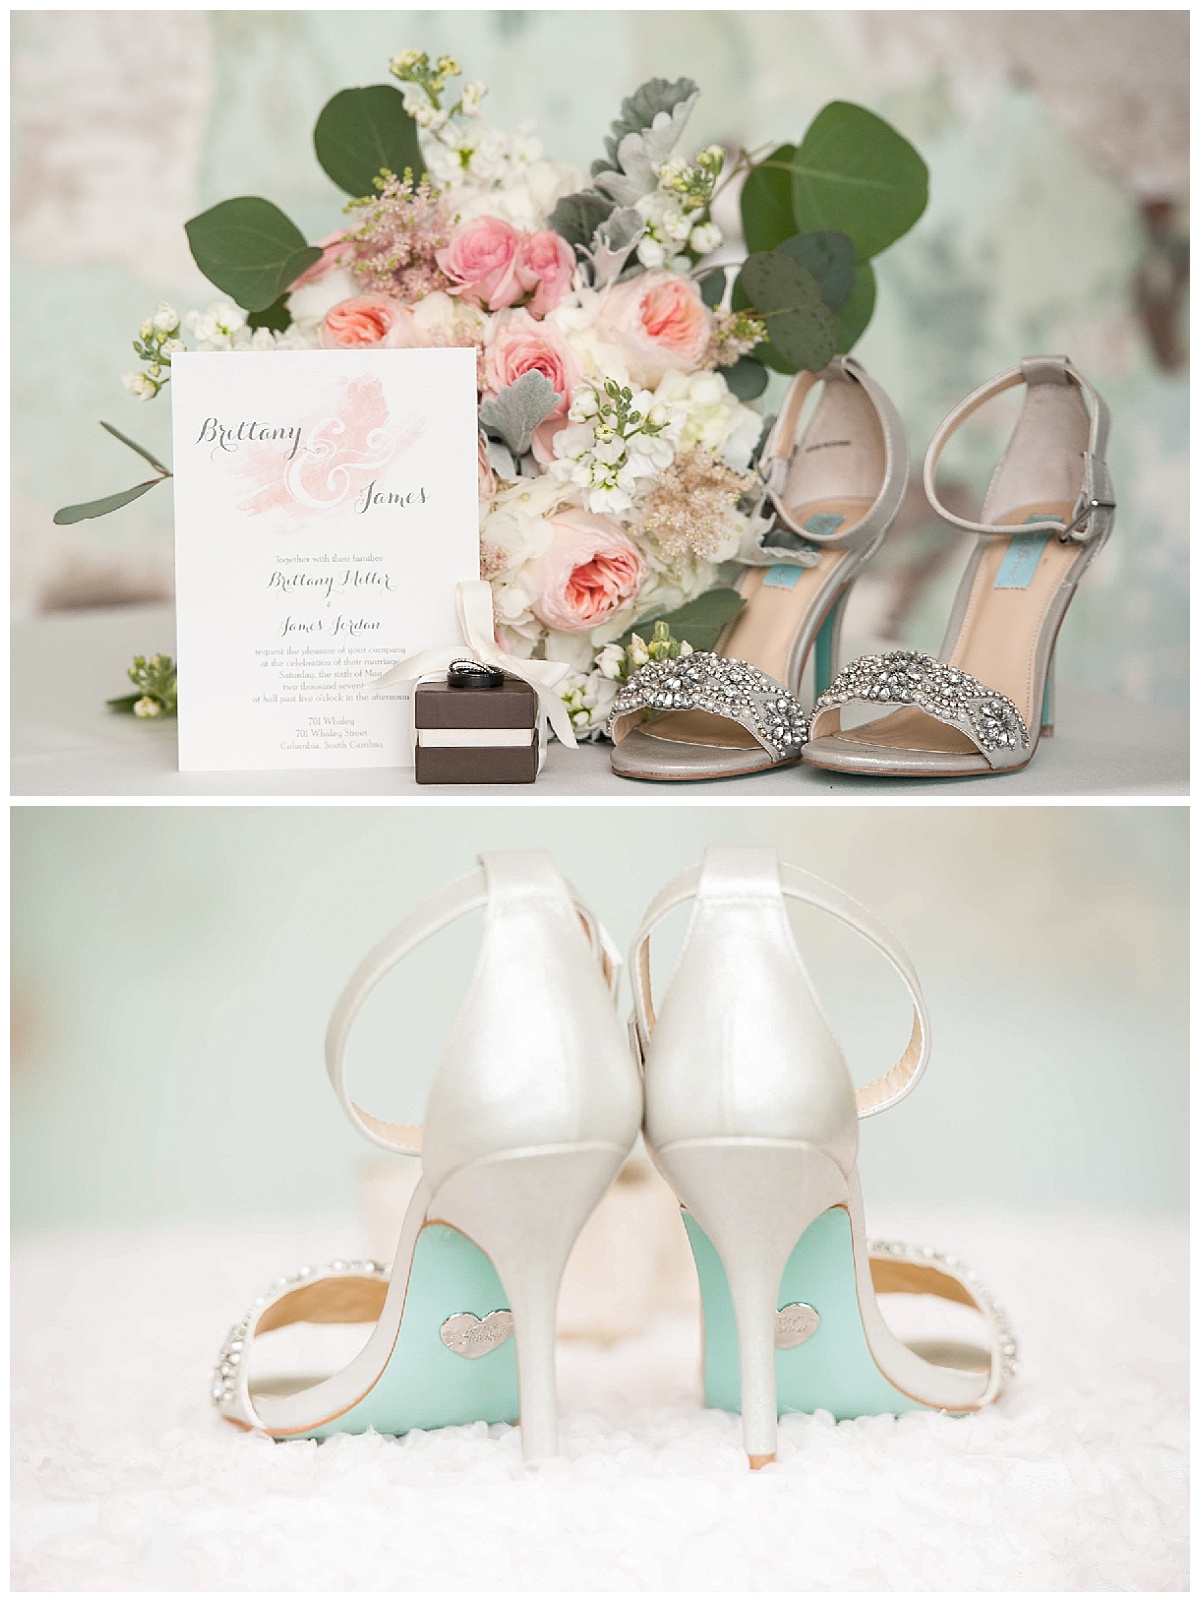 Pink and green color scheme and wedding shoes